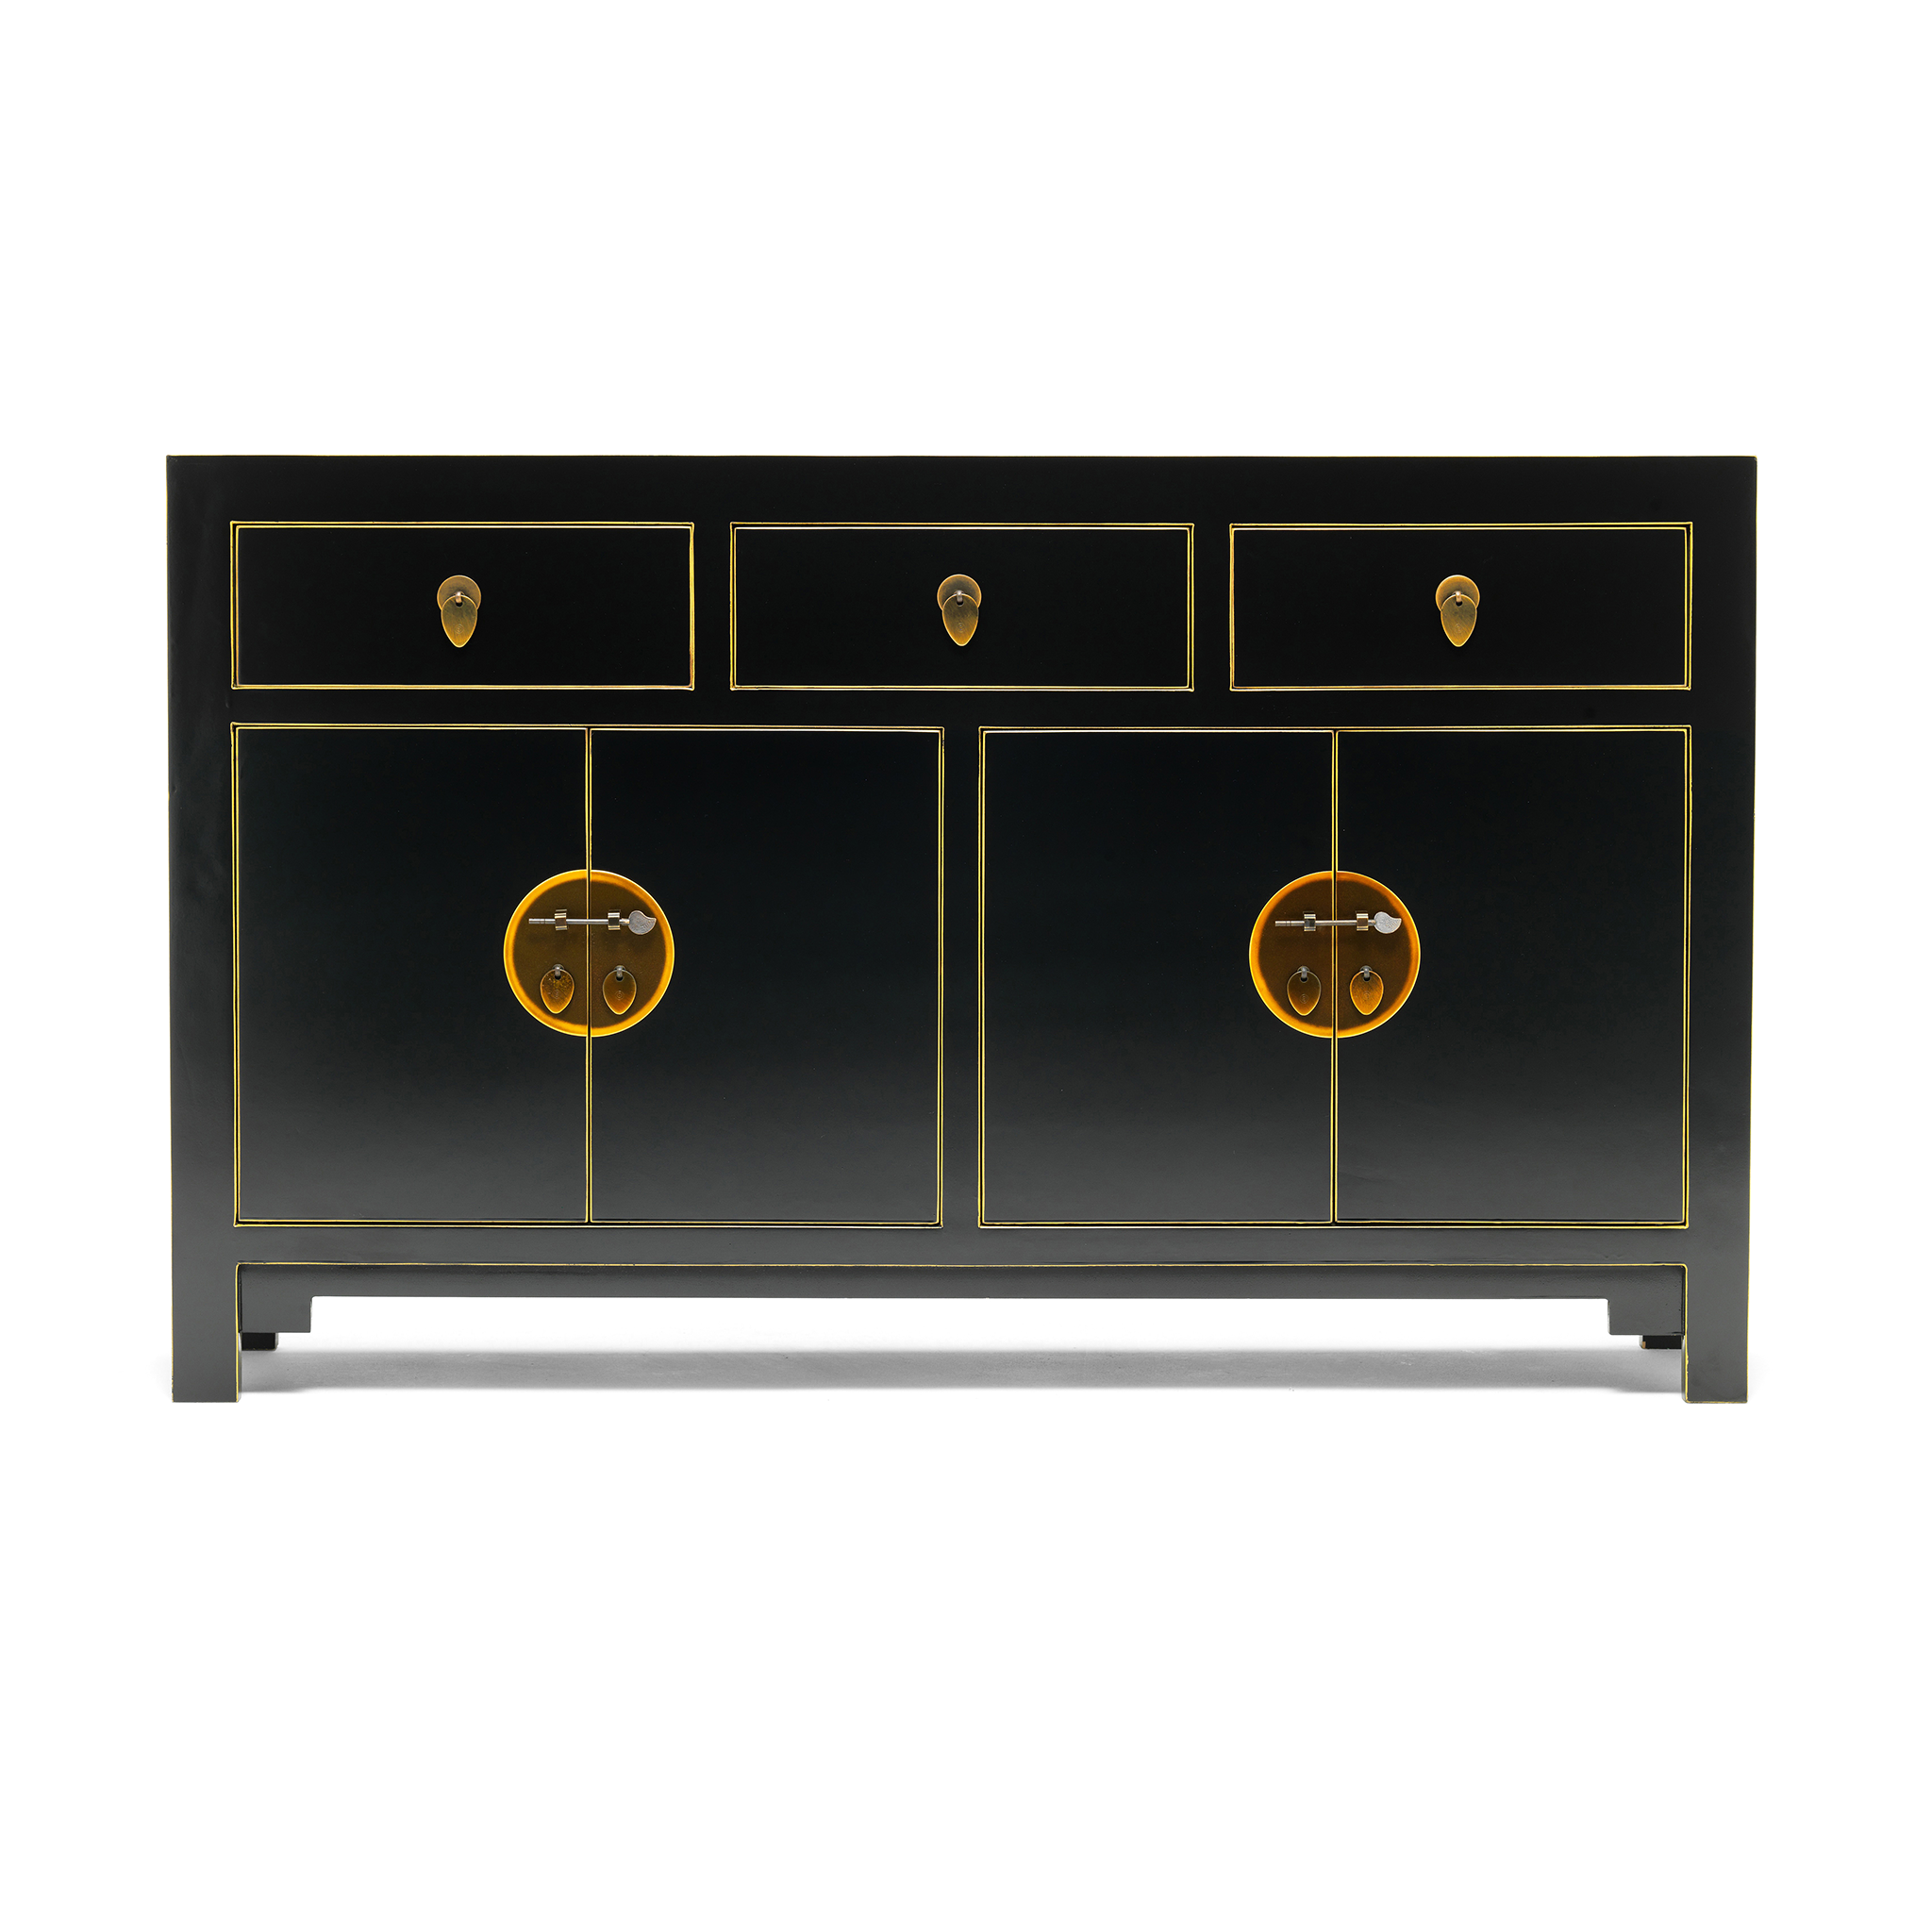 Qing black and gilt sideboard, large